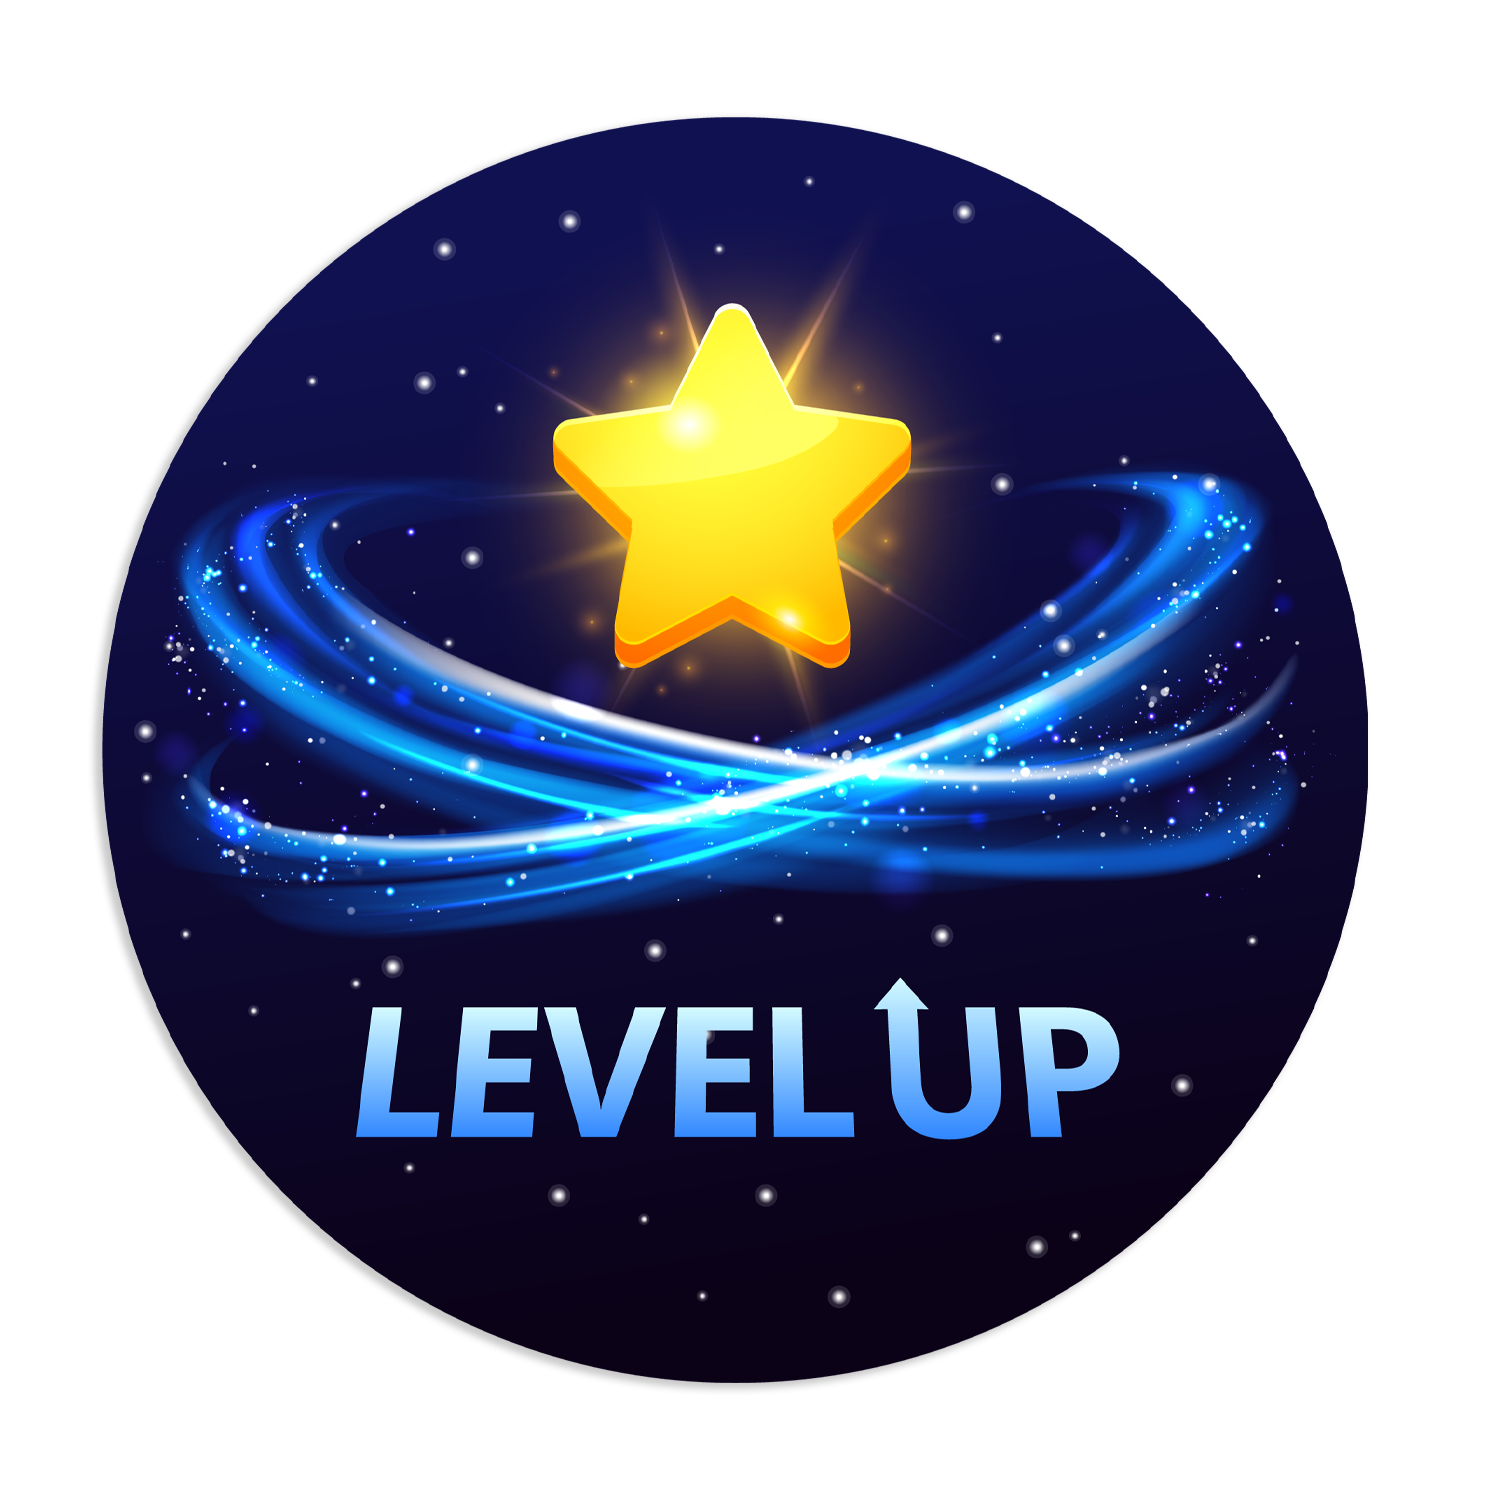 THUMBNAIL__ICONS_LevelUp.png__PID:eb0b3574-151a-4302-a99d-0d104a5cb202